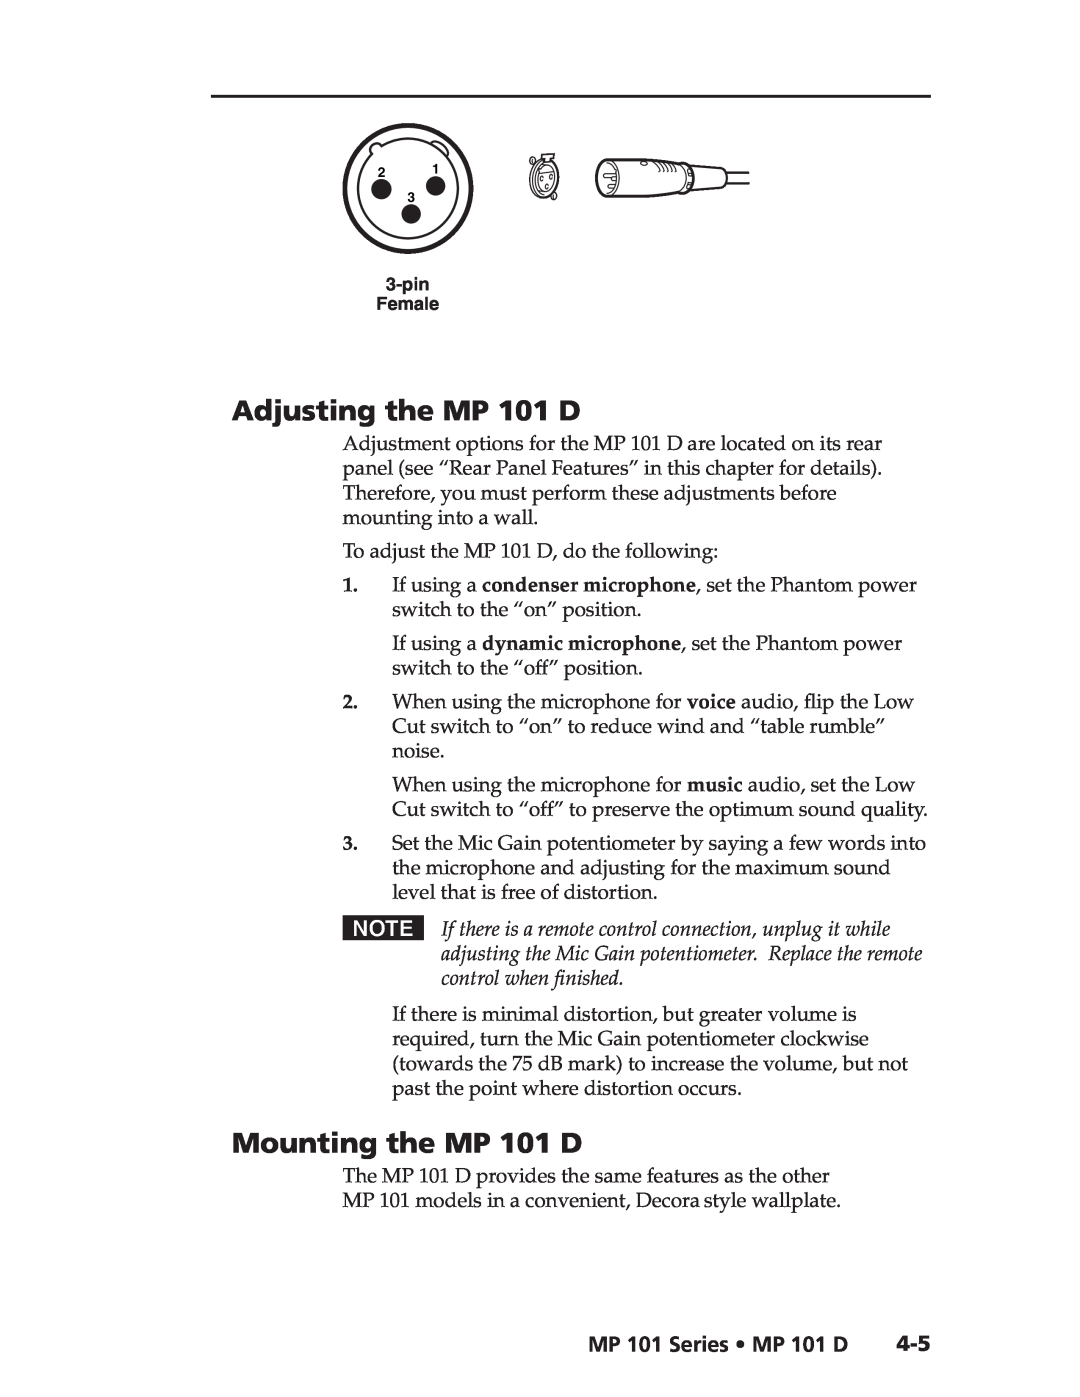 Extron electronic user manual Adjusting the MP 101 D, Mounting the MP 101 D, MP 101 Series MP 101 D 